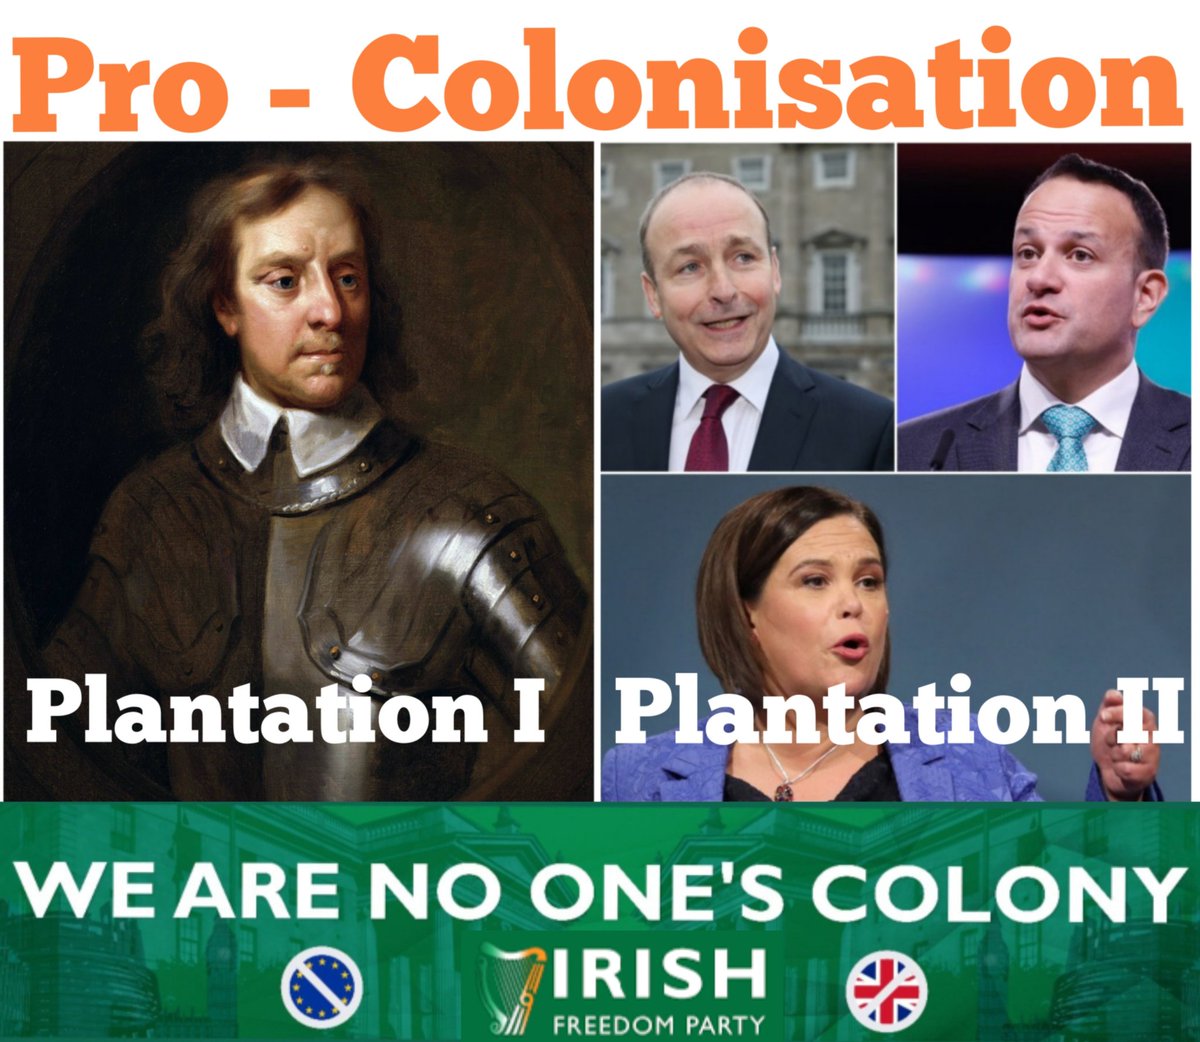 @Ogra_SF Oppose the colonisation of Ireland. Say No to the New Plantation, which is supported by #SinnFein